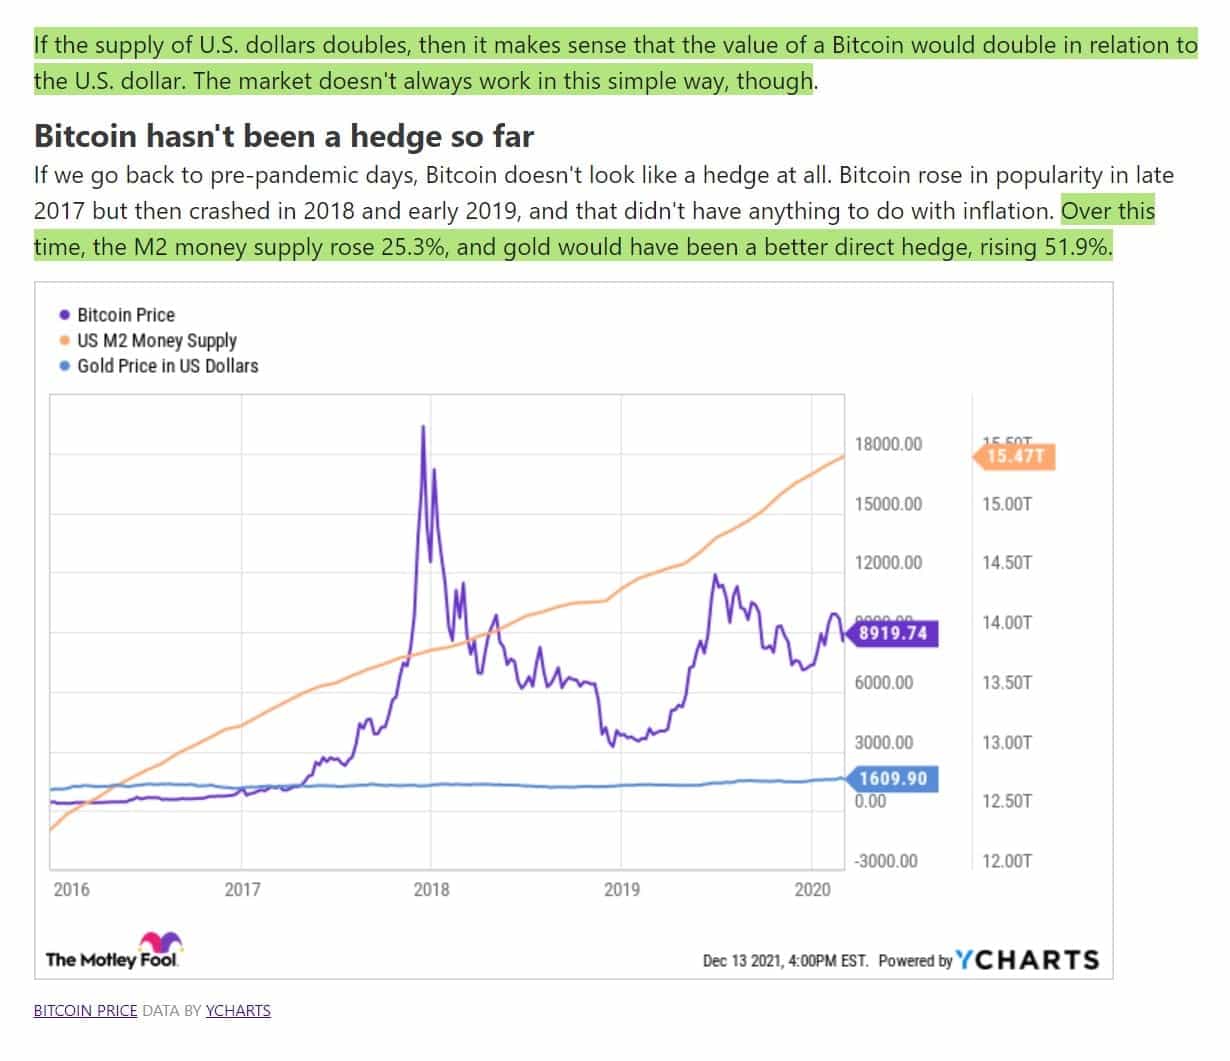 Chart Showing that Gold was a Better Hedge During Times of Heavy Bitcoin Drops, Though Interestingly, Neither Asset Comes Close to Outpacing That Insane Rise in the Money Supply Caused by the Fed Printing Image via The Motley Fool 